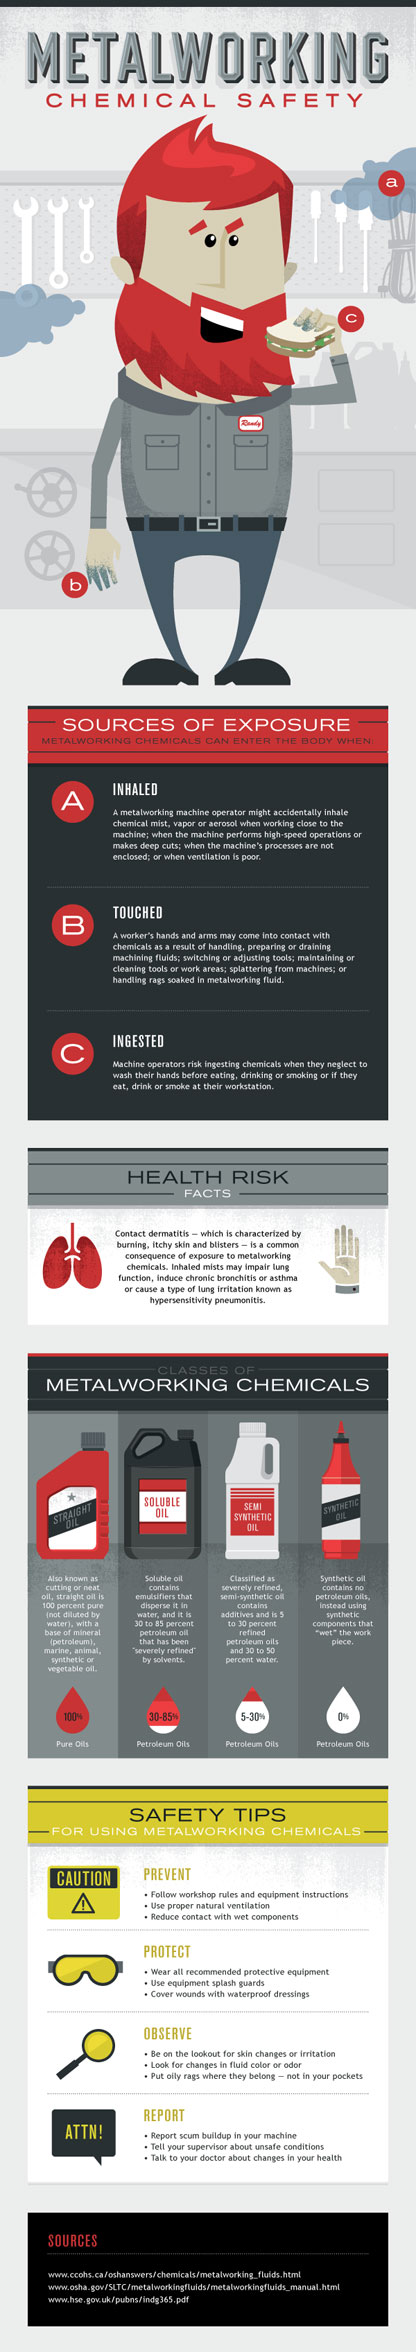 Metalworking Chemical Safety